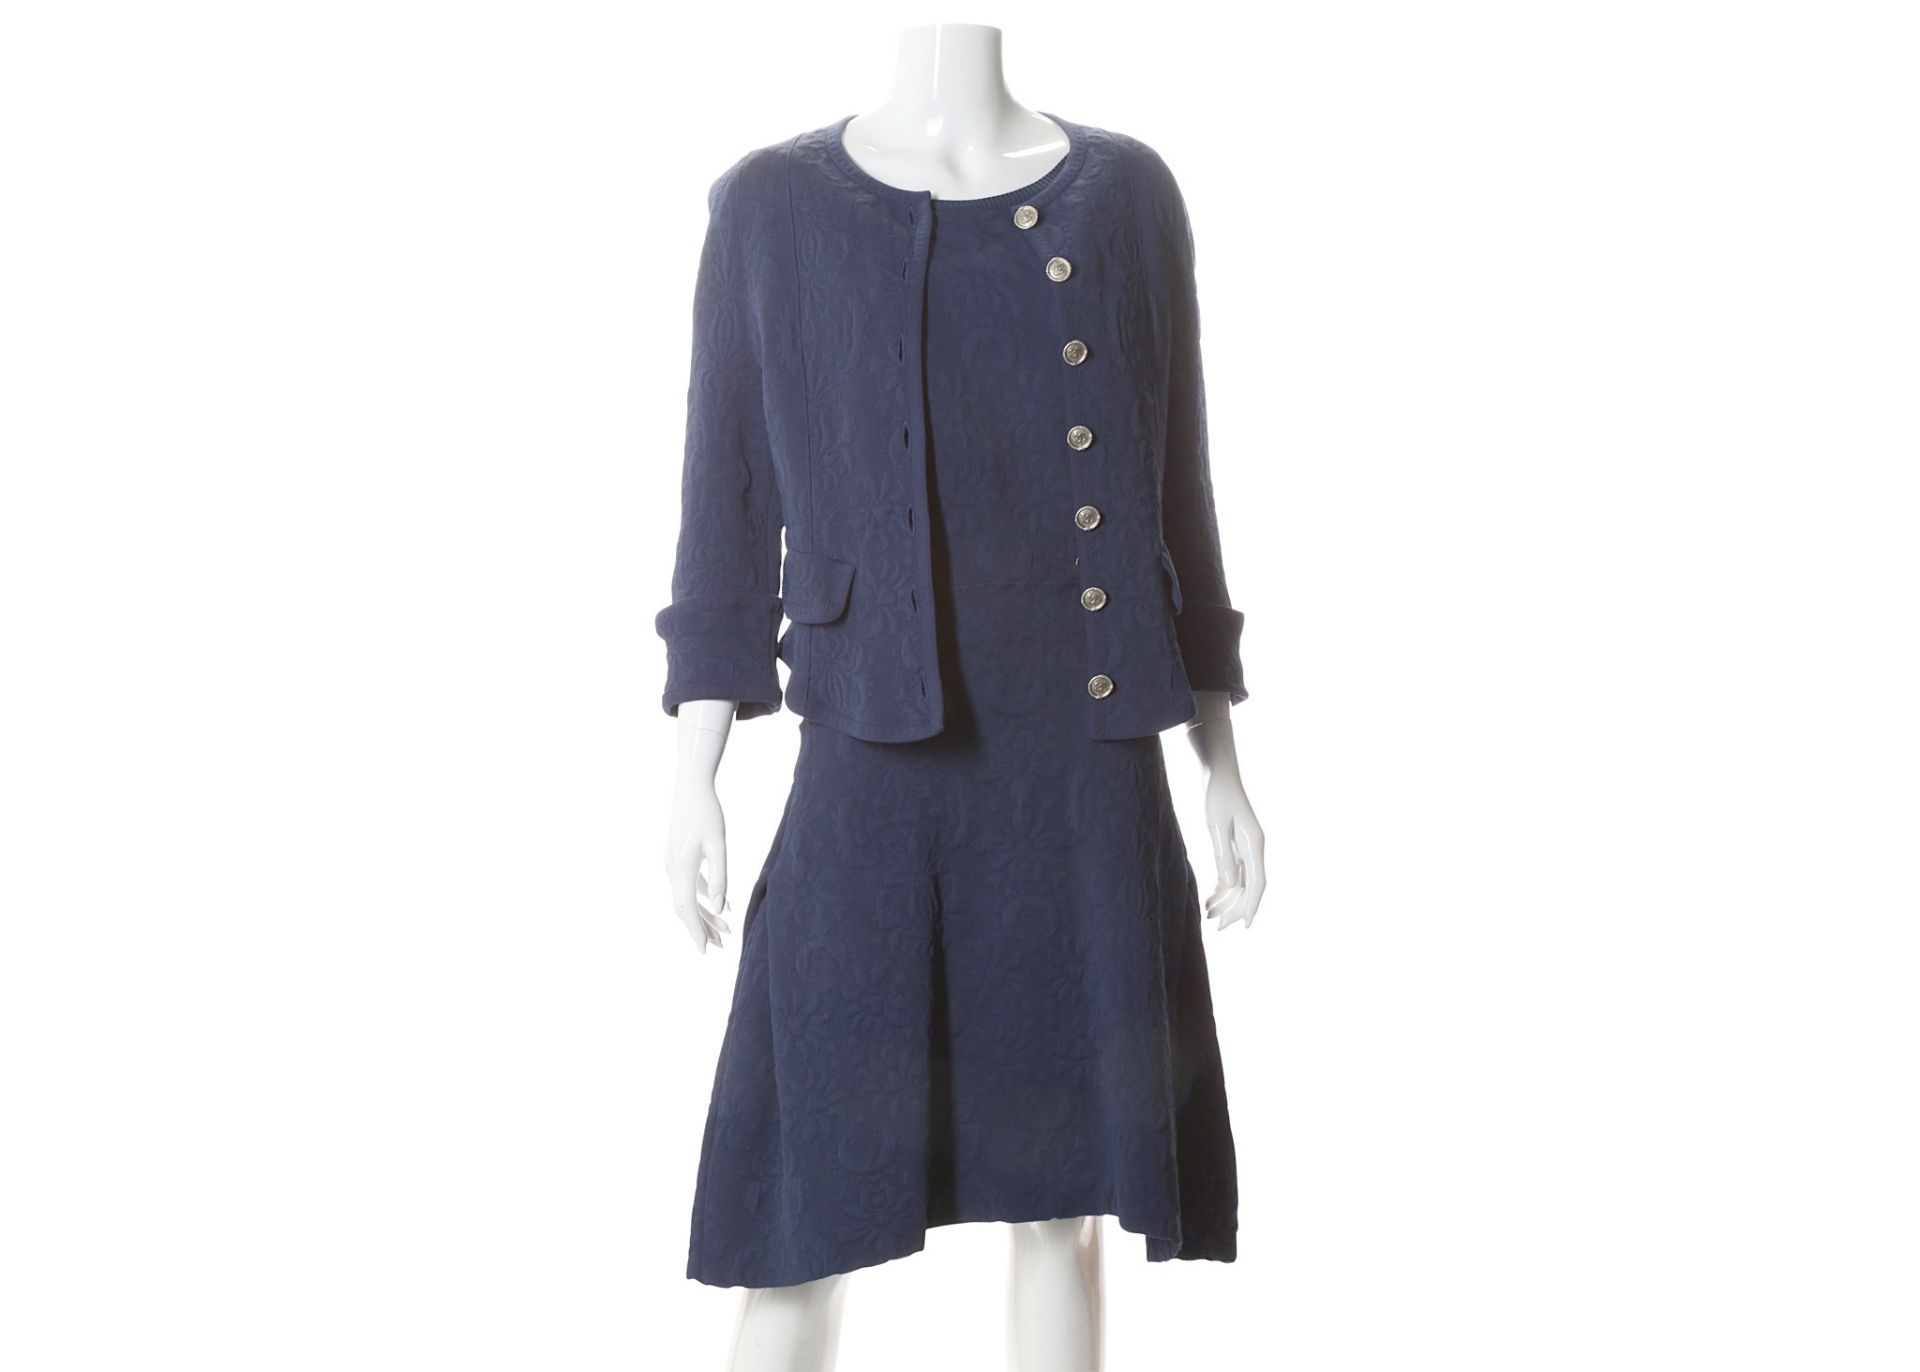 Chanel Navy Blue Jacket and Dress, 2010s, raised b